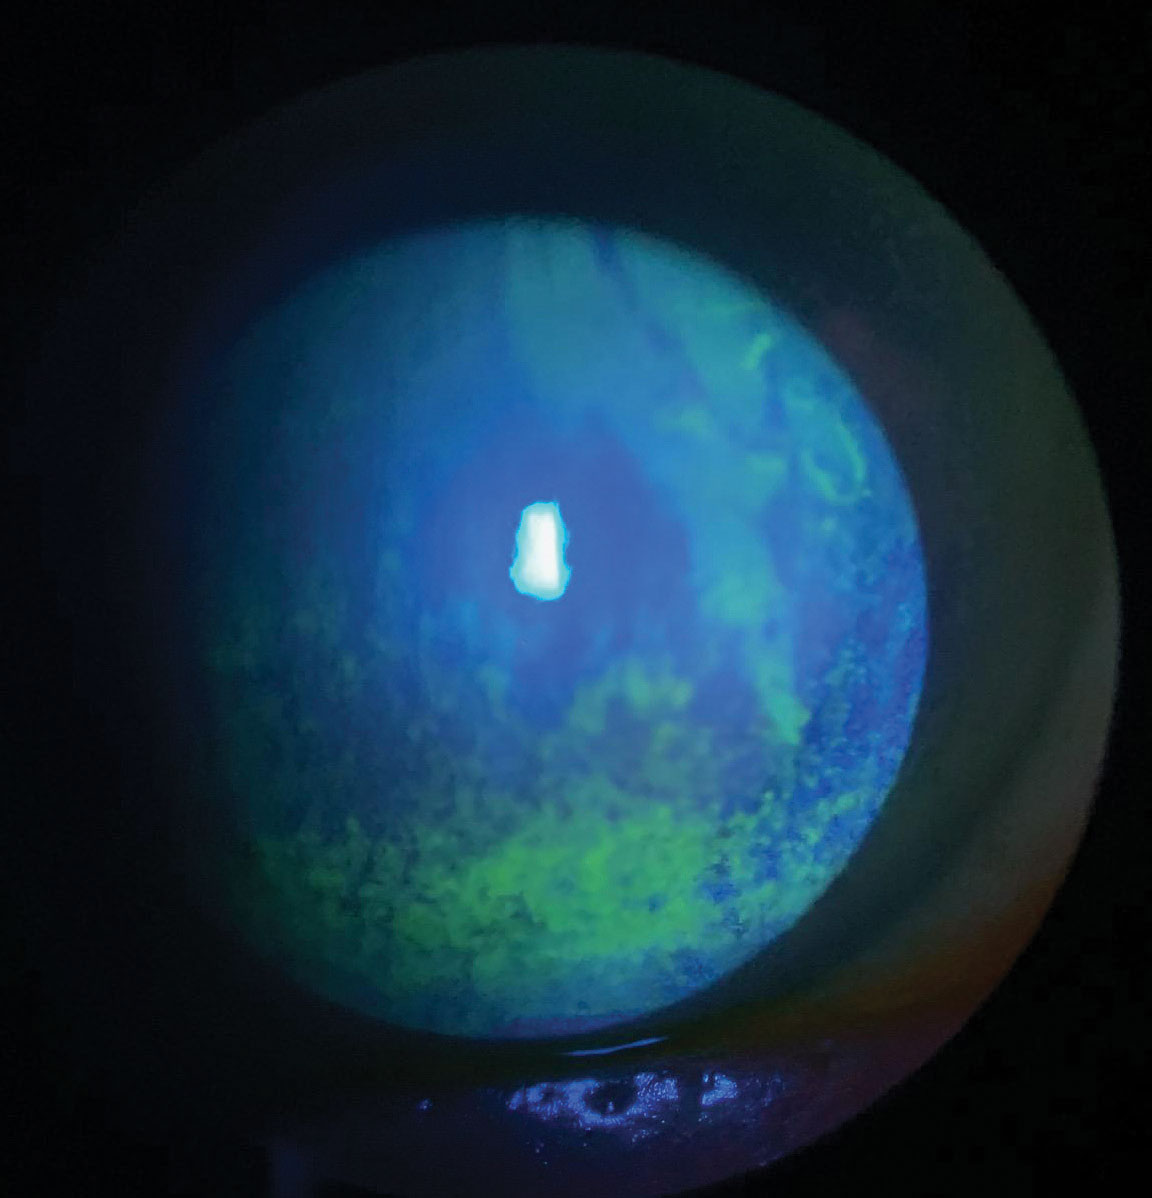 In this study, patients with DED who wore contacts showed increased ocular surface staining.